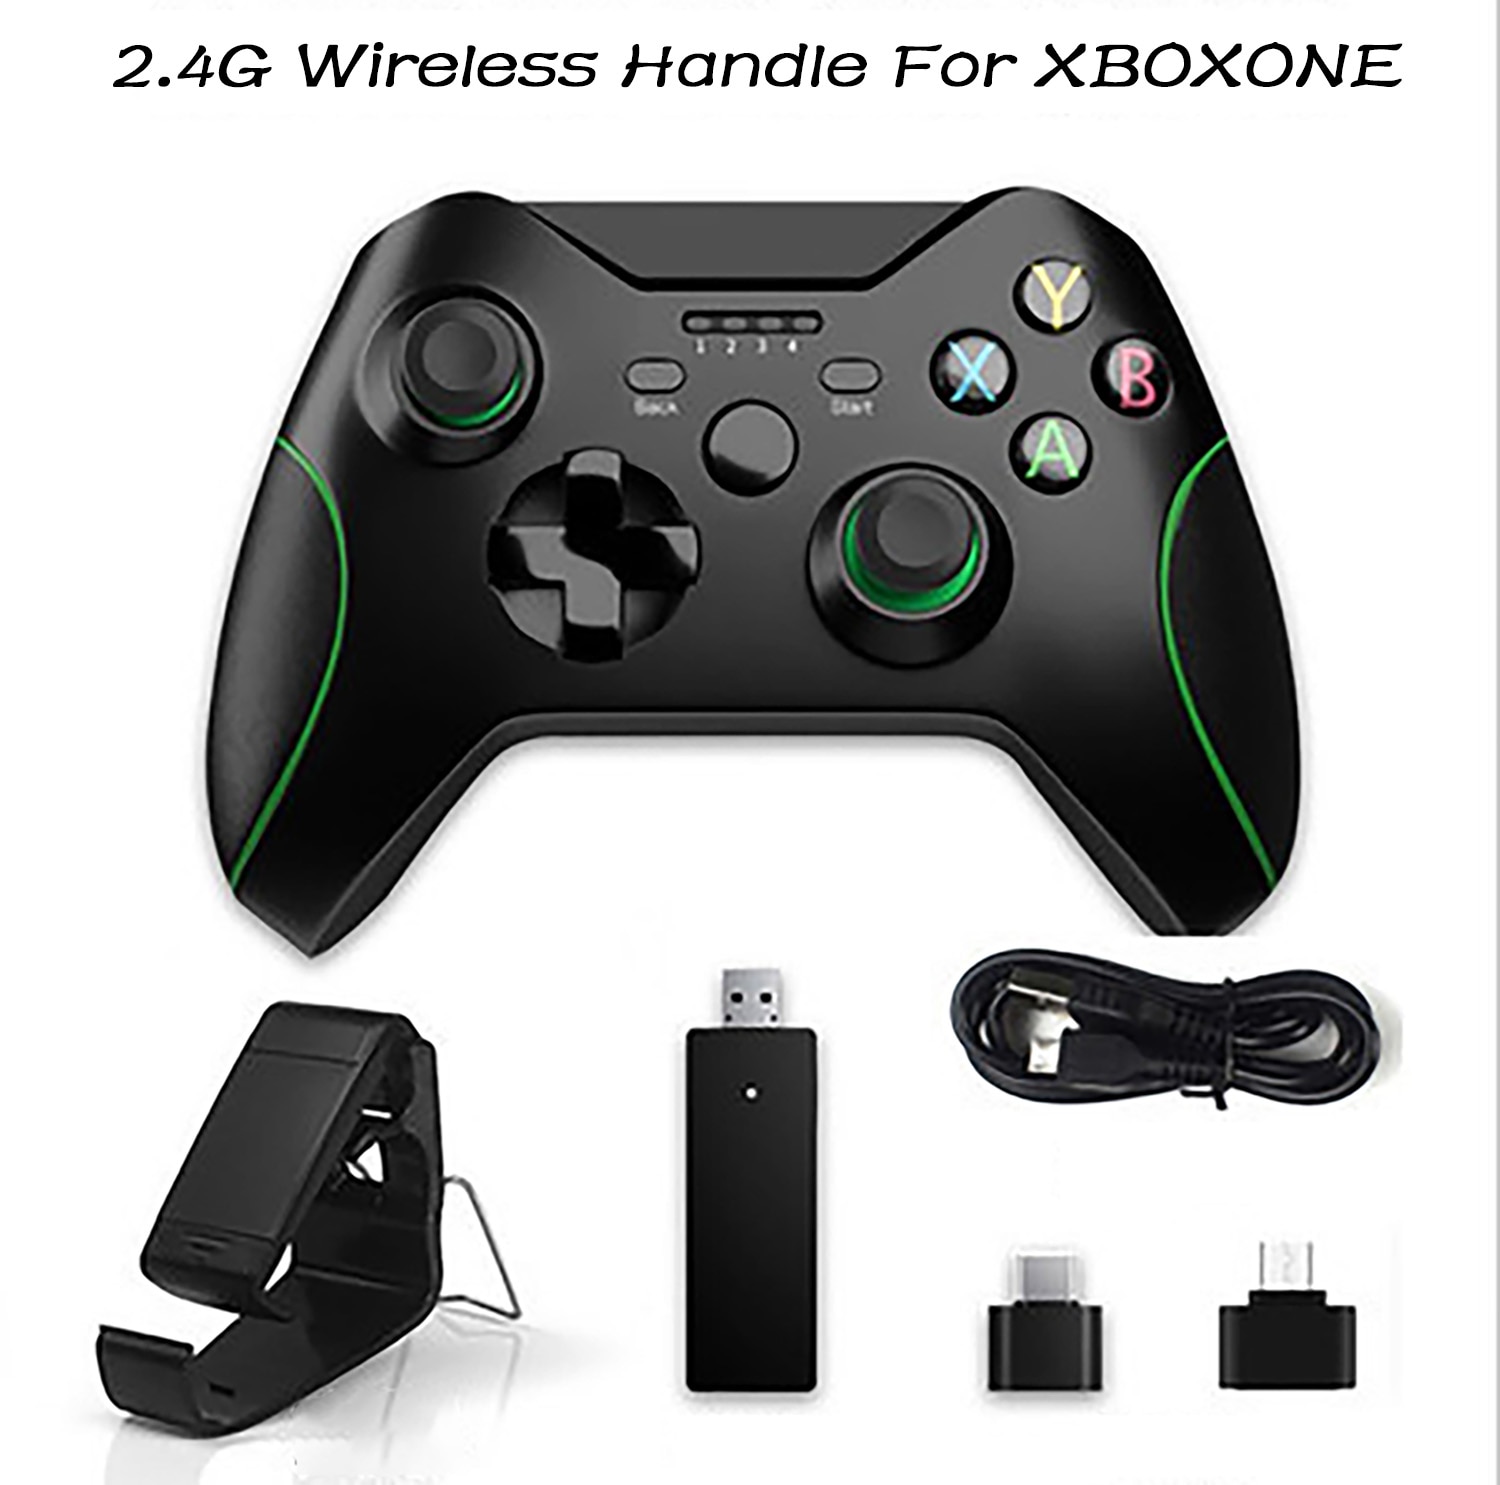 New 2.4GHz Wireless Controller For Xbox One S X Console Accessorie PC Joystick For PS3 Gamepad Controle For Android Phone/Steam